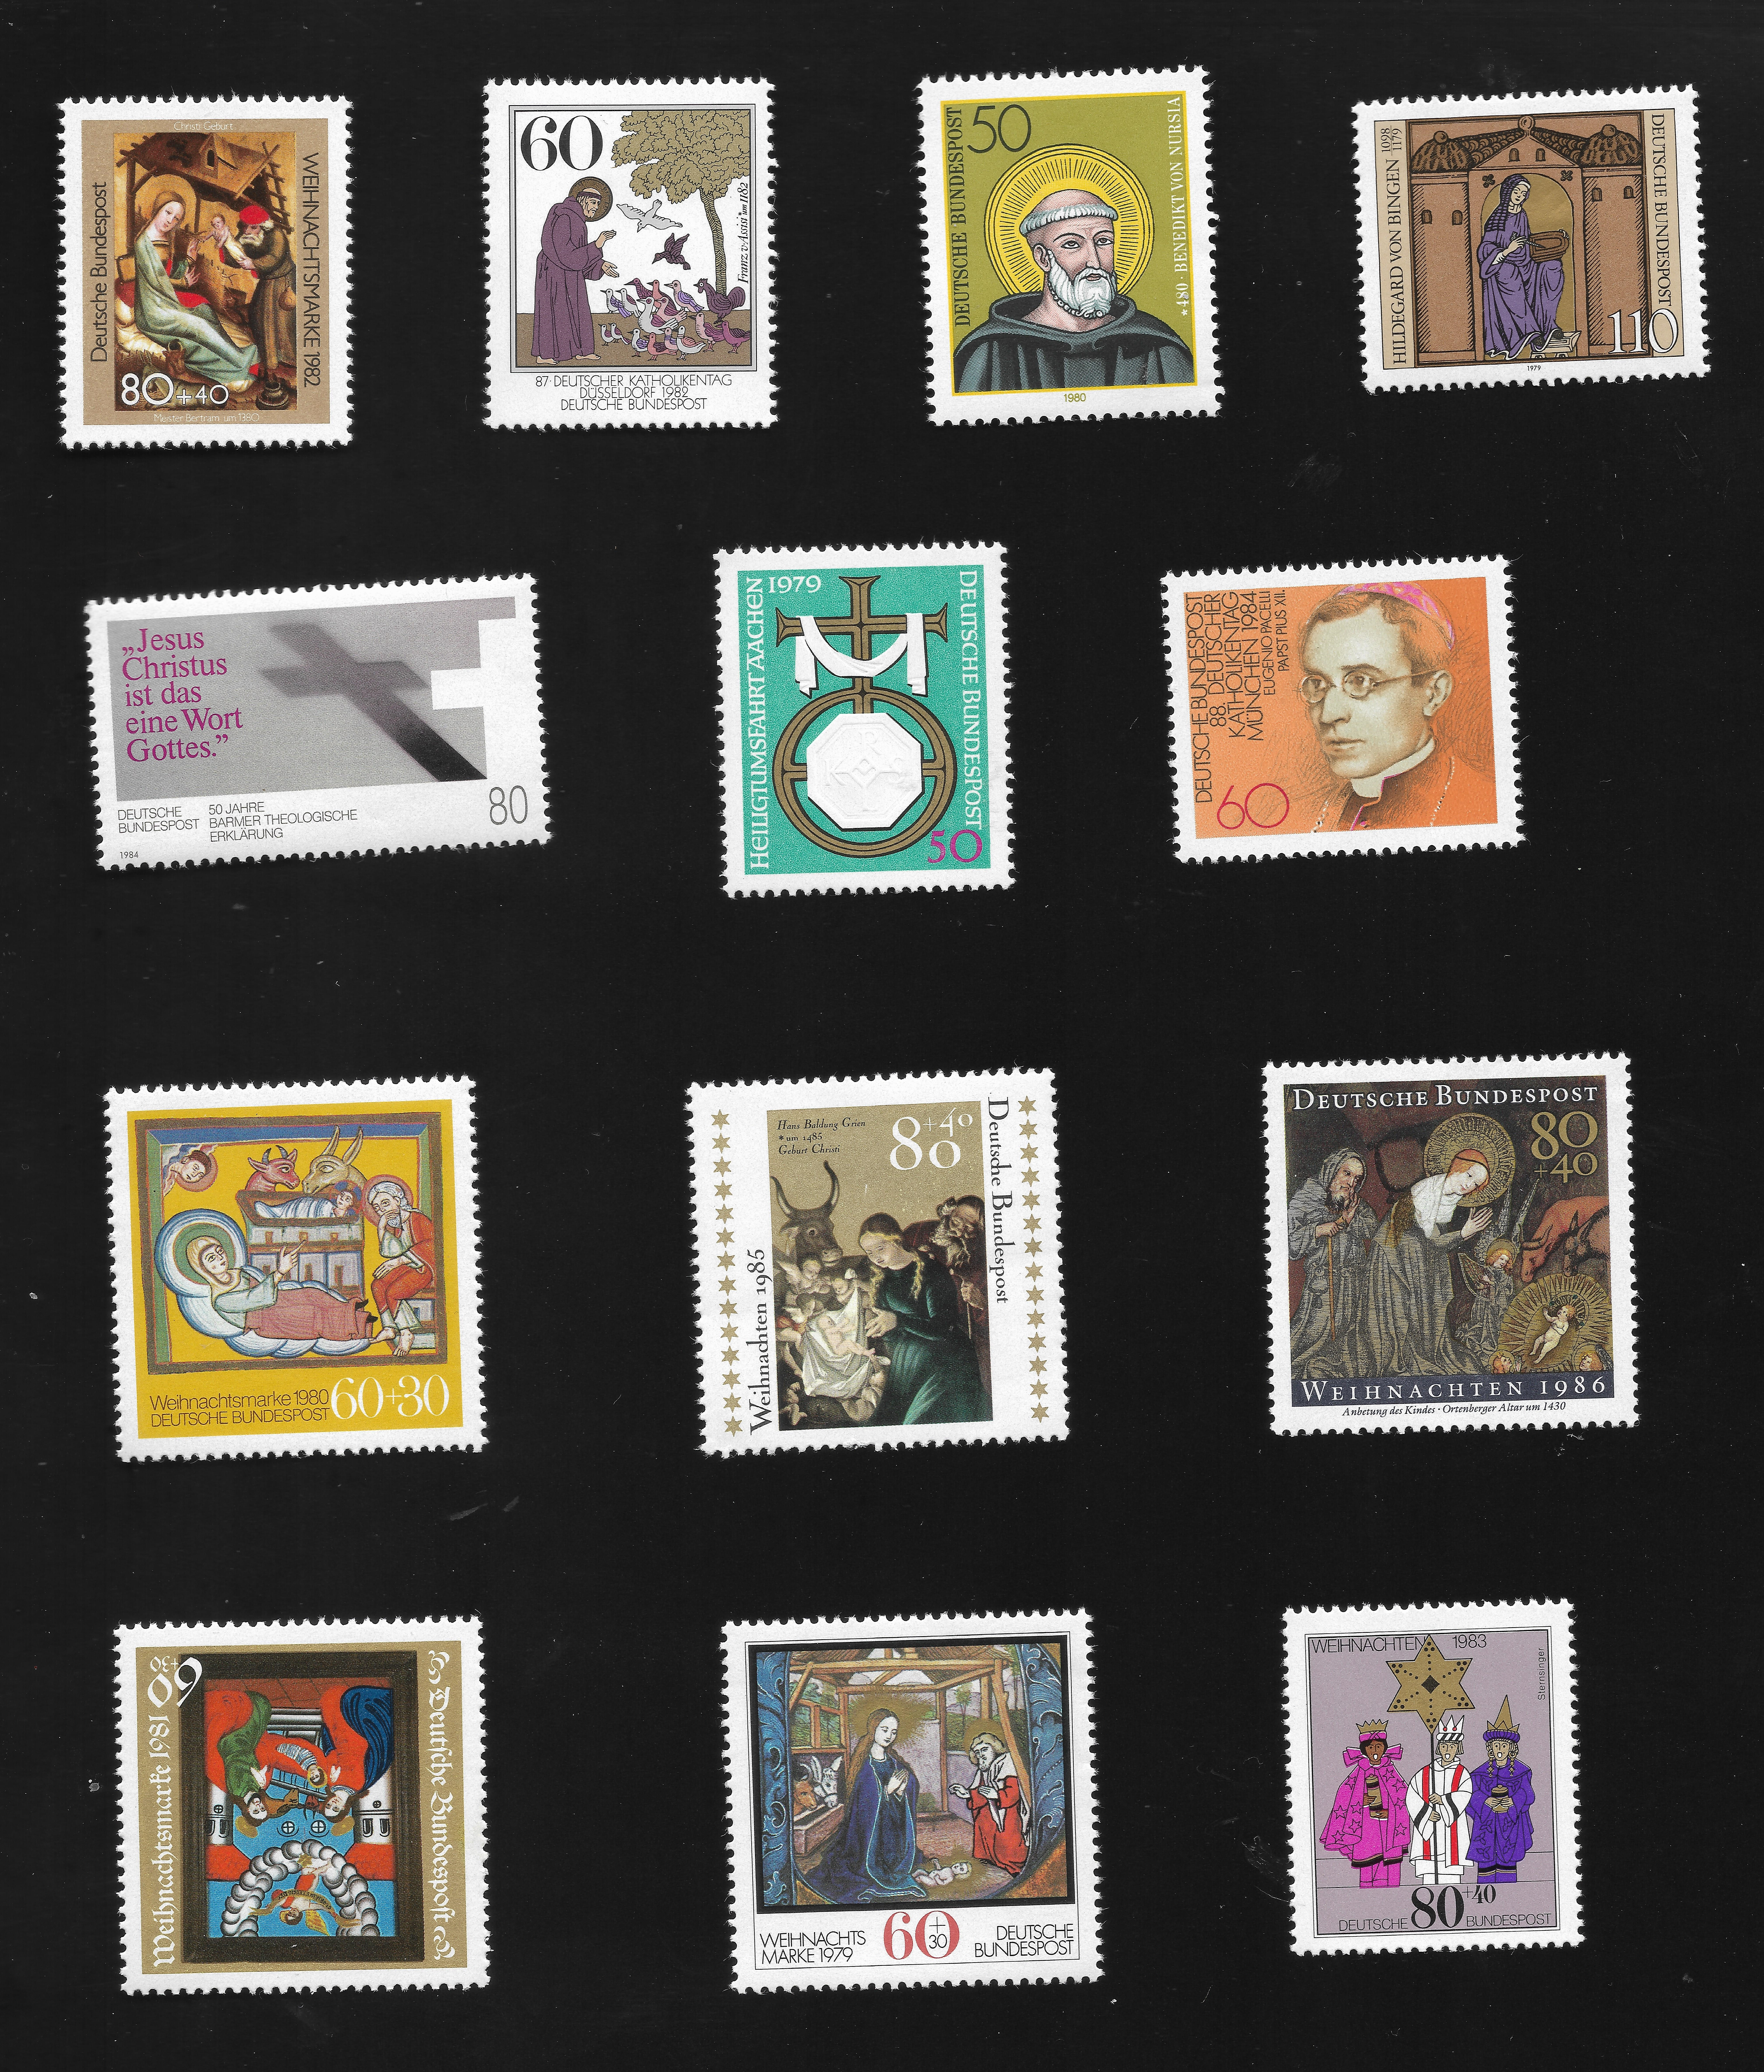 Germany - Christmas and religious stamps, 1979-1986